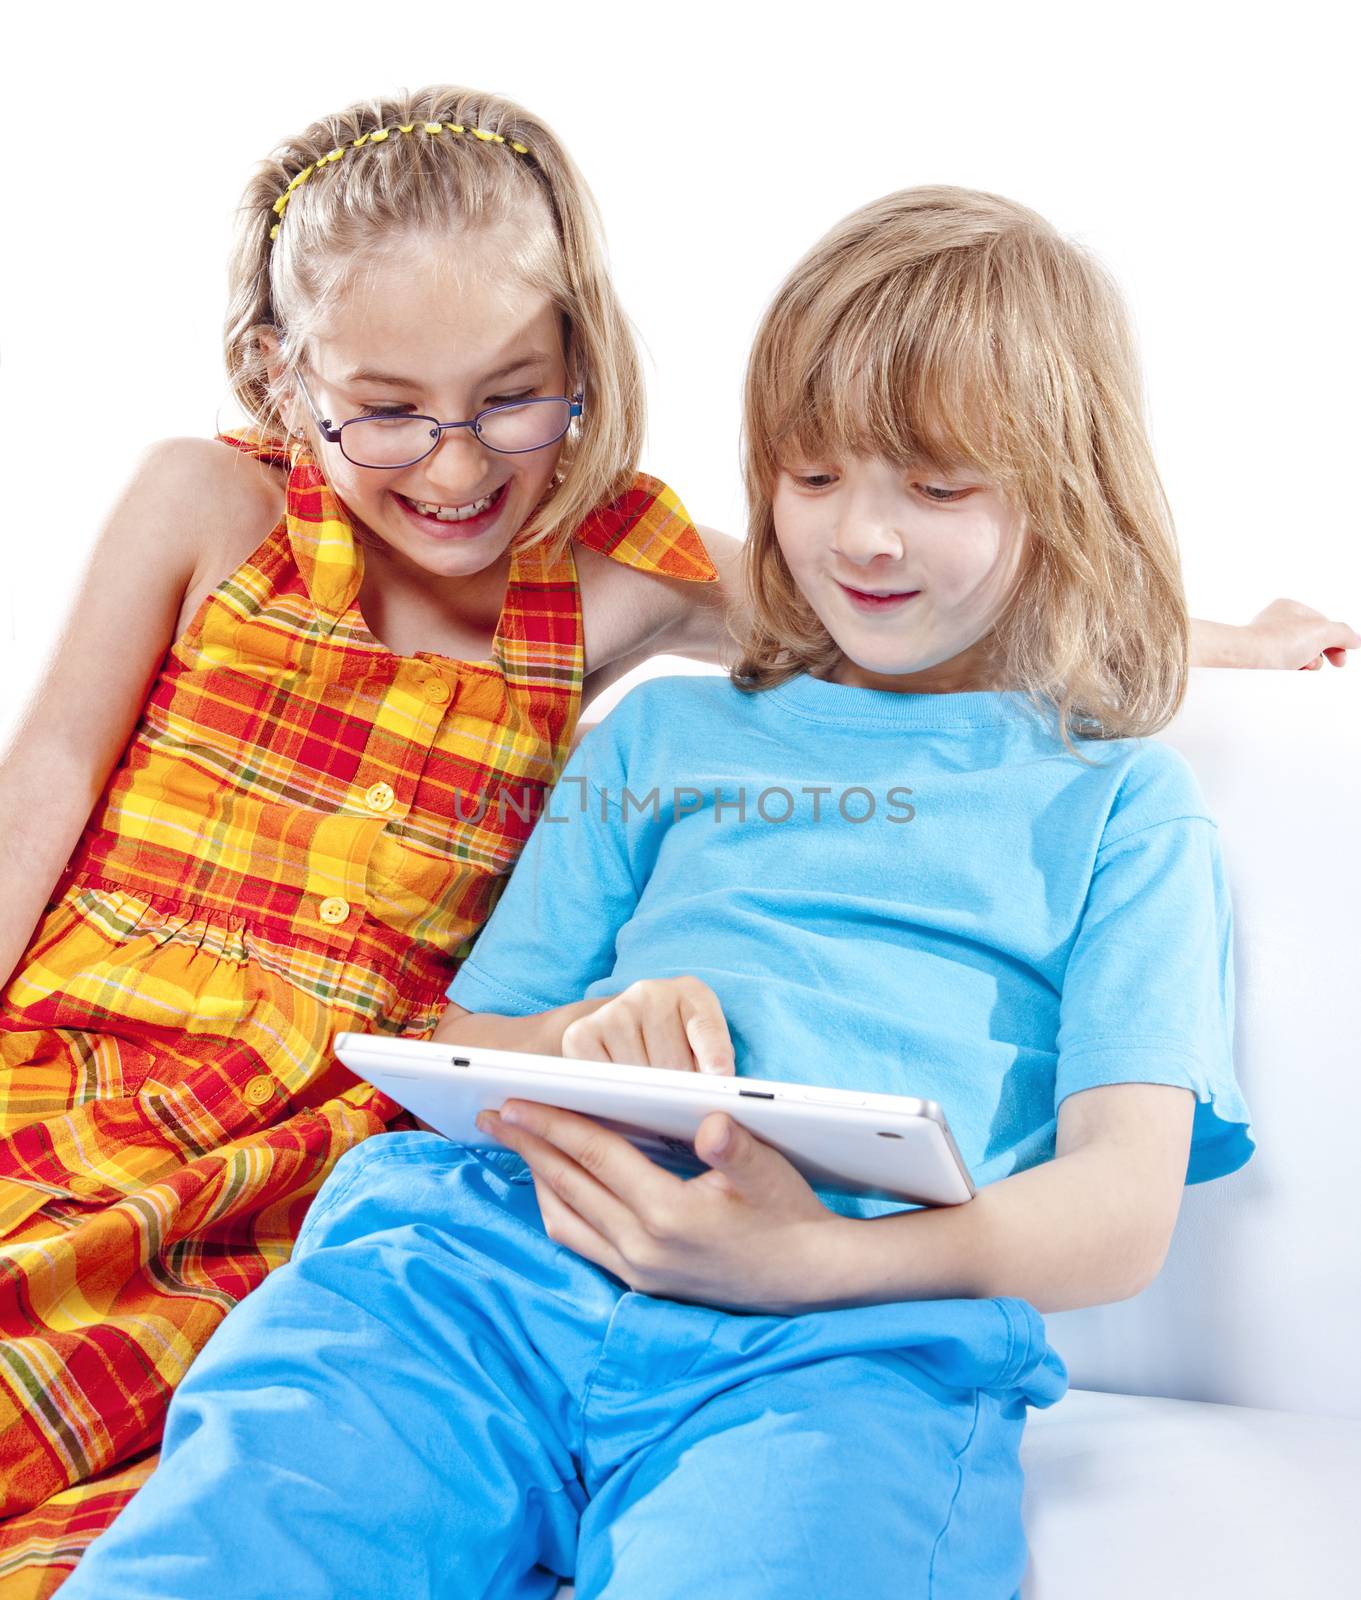 Two Children Having Fun with Digital Tablet by courtyardpix